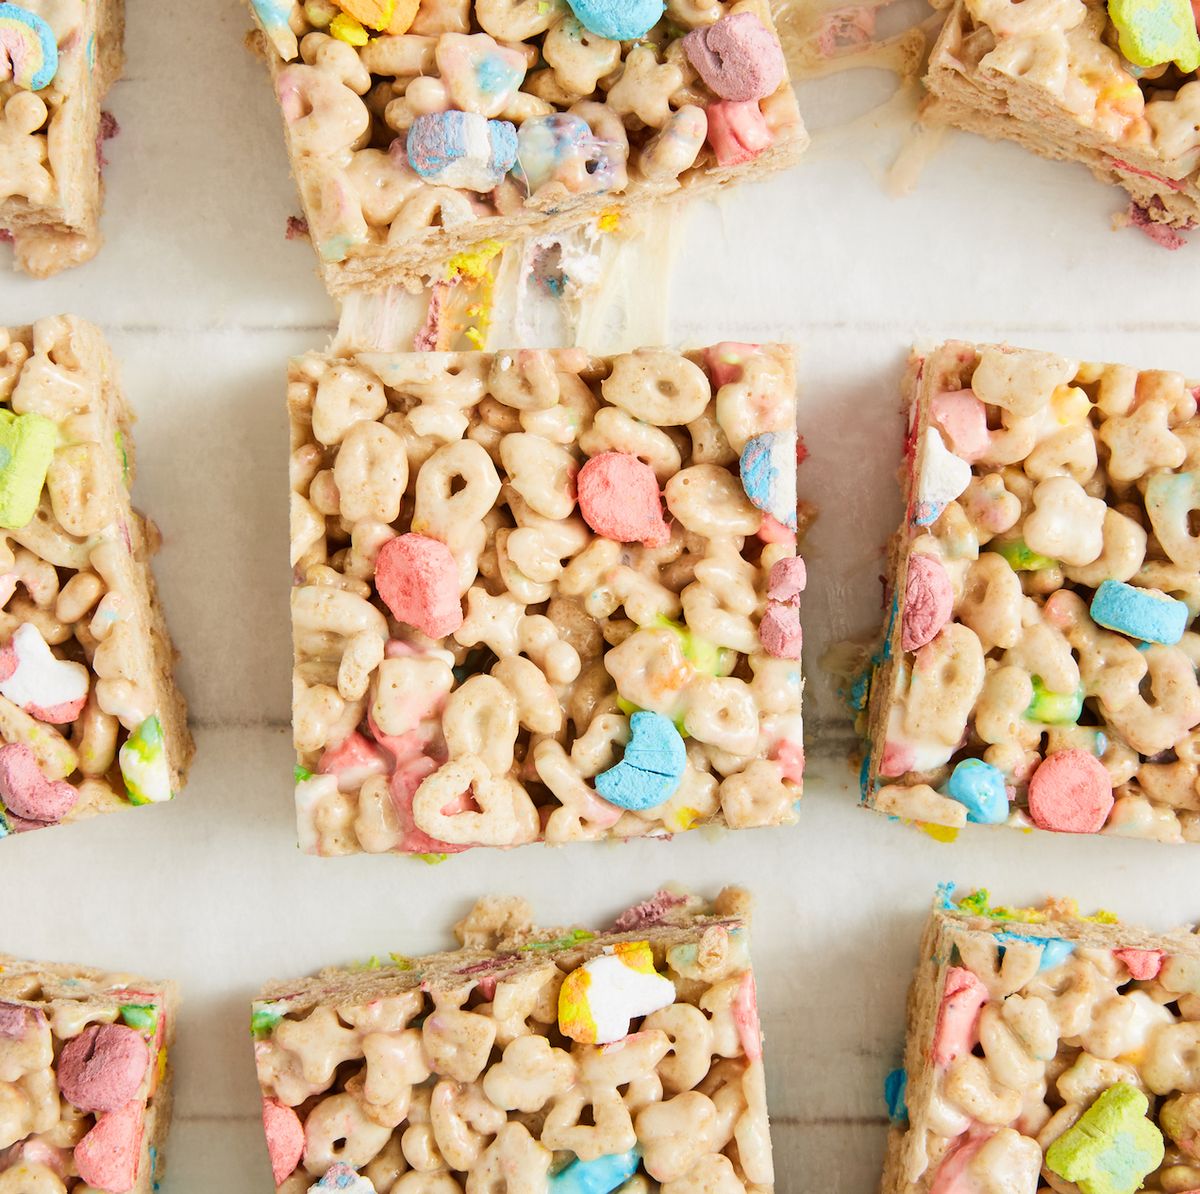 Best Lucky Charms Bars Recipe - How To Make Lucky Charms Bars